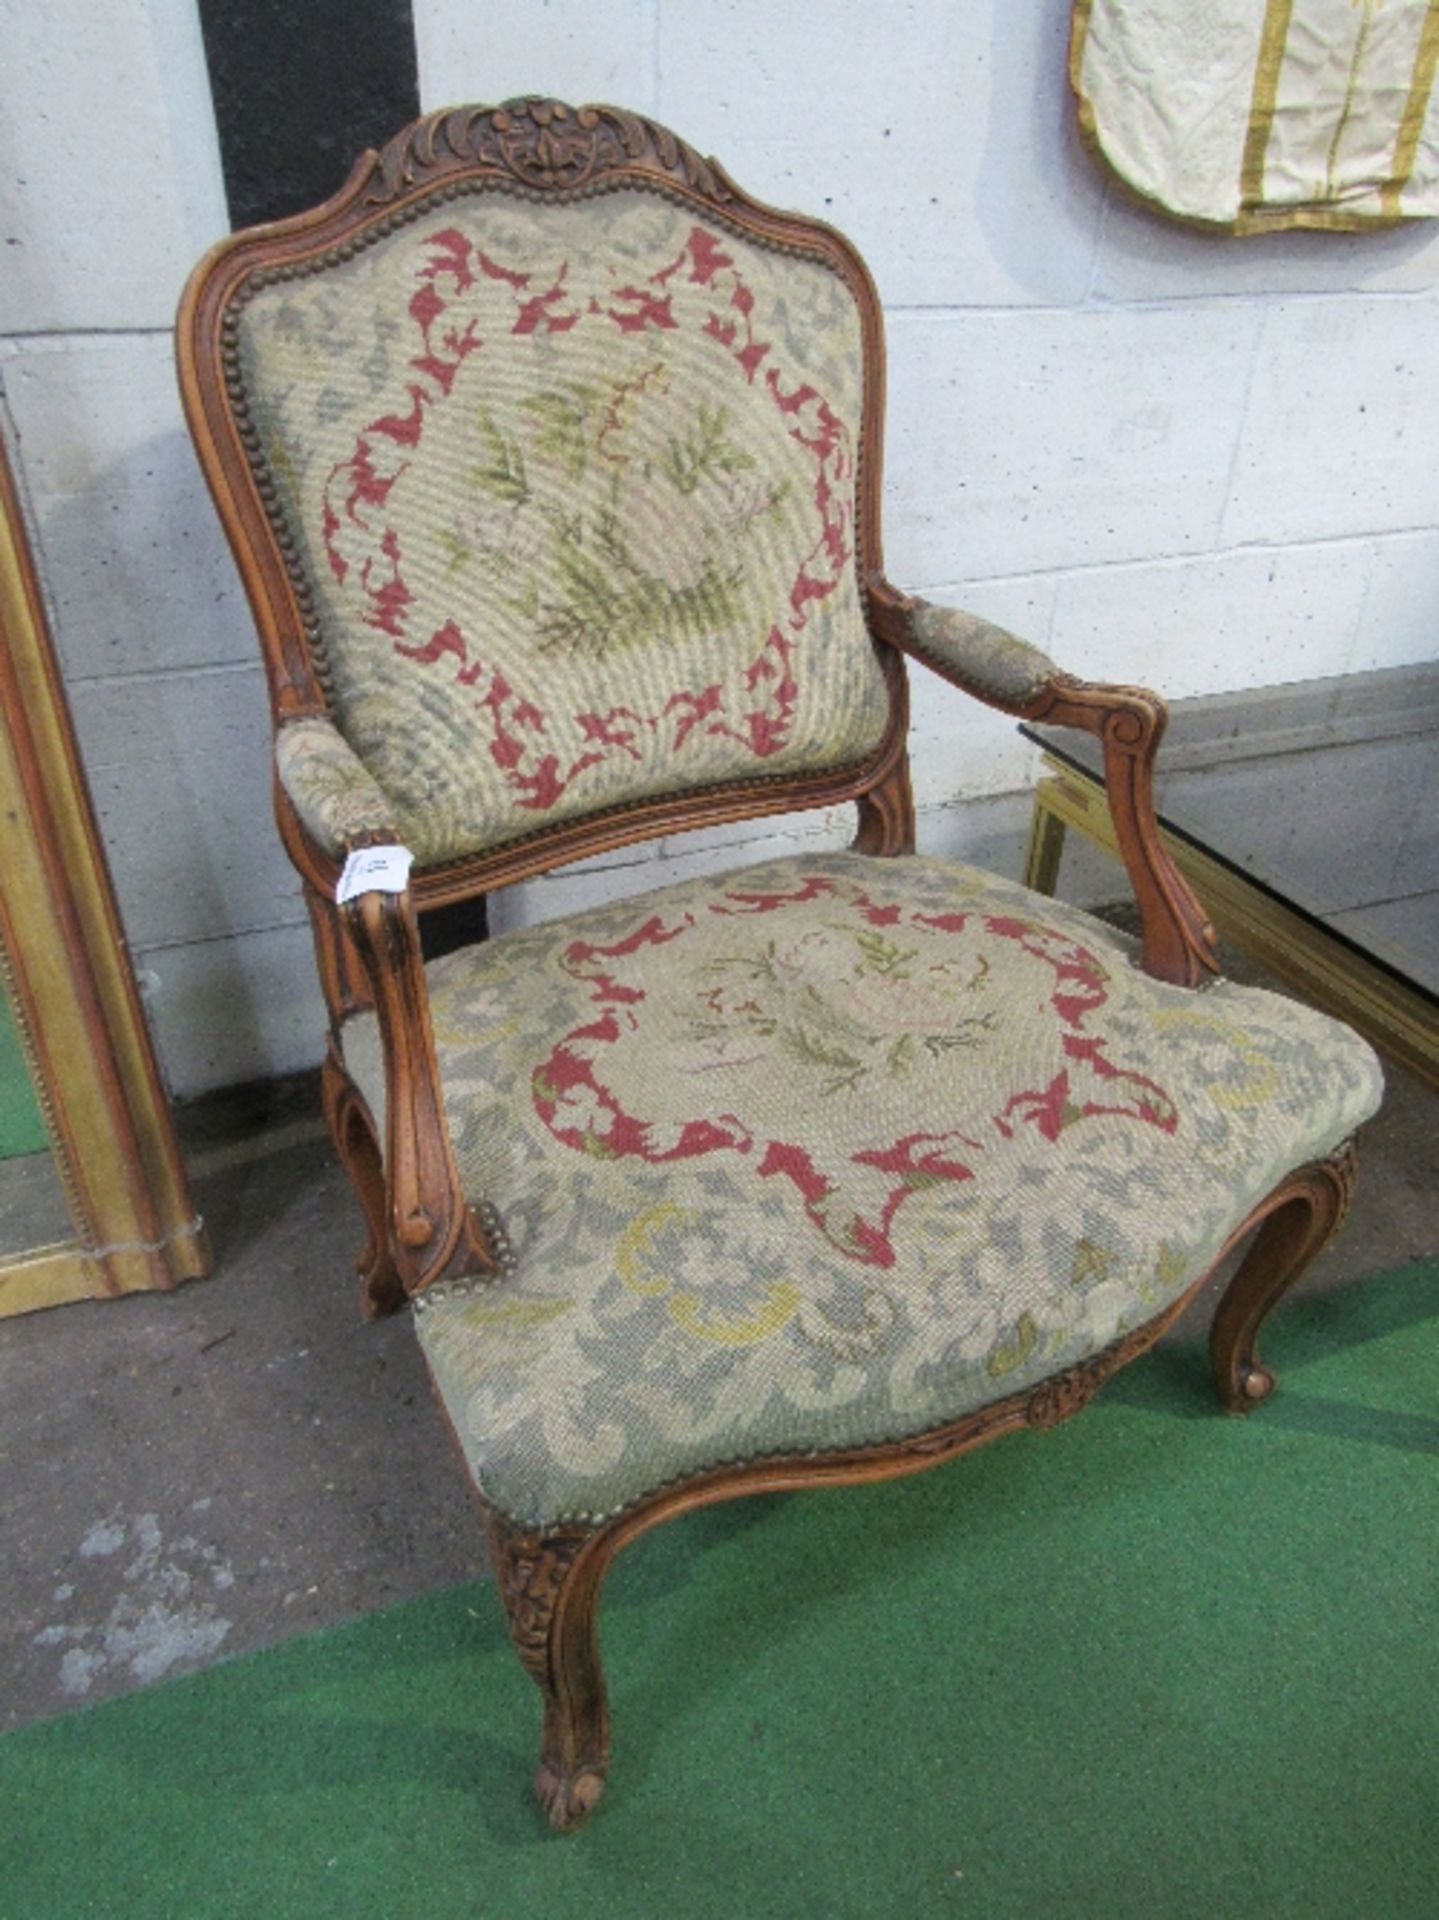 Large French cherry wood Fauteuil armchair with woven patterned fabric (shows signs of being